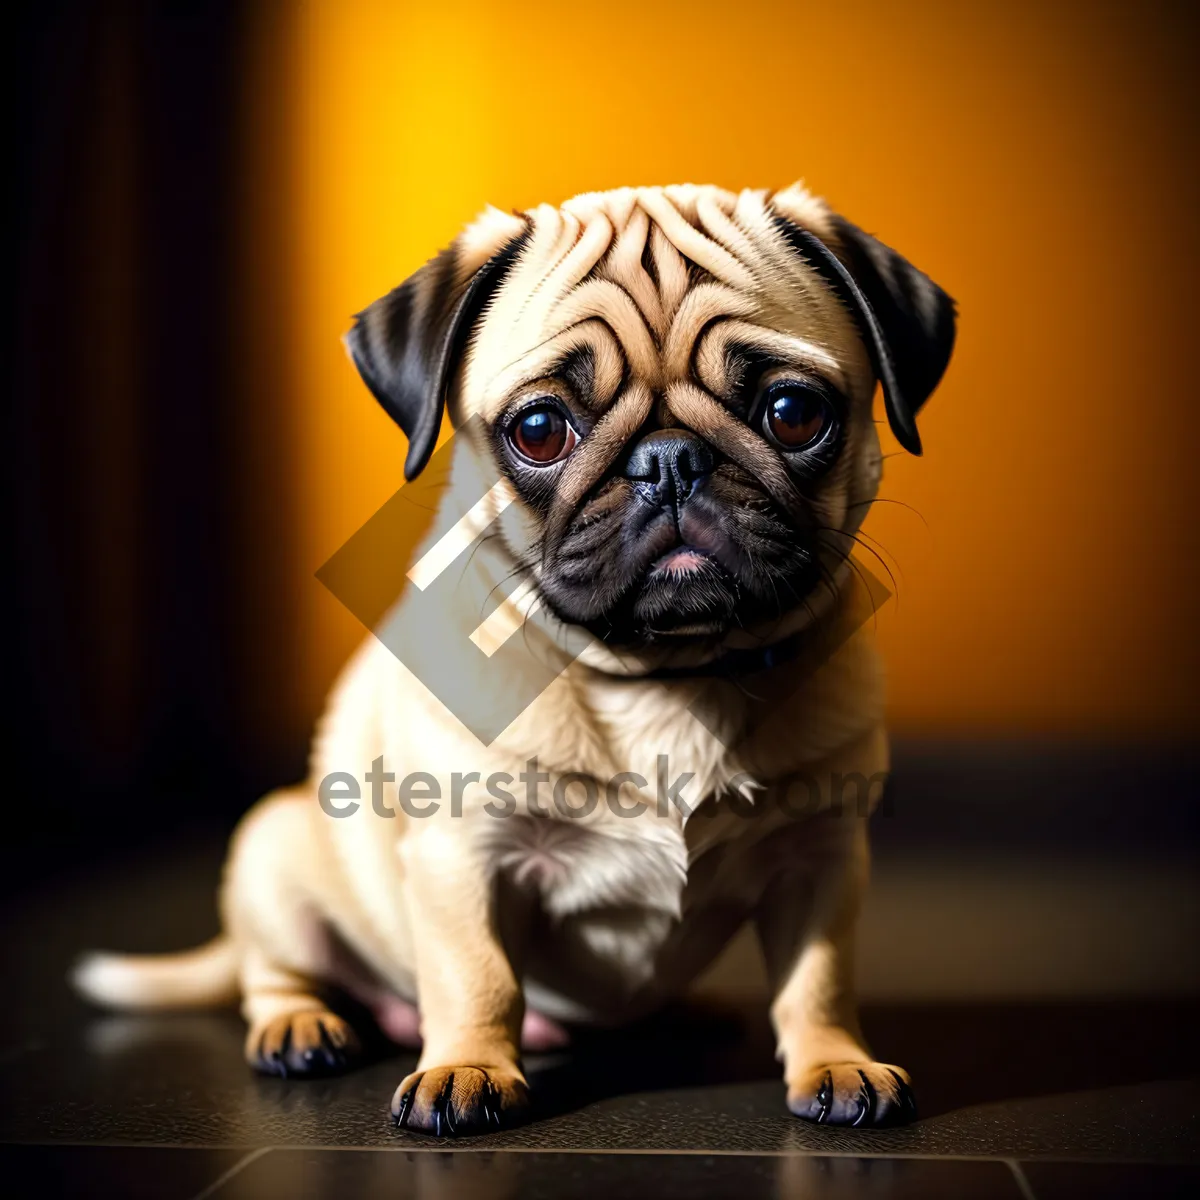 Picture of Adorable Pug Puppy with Wrinkles